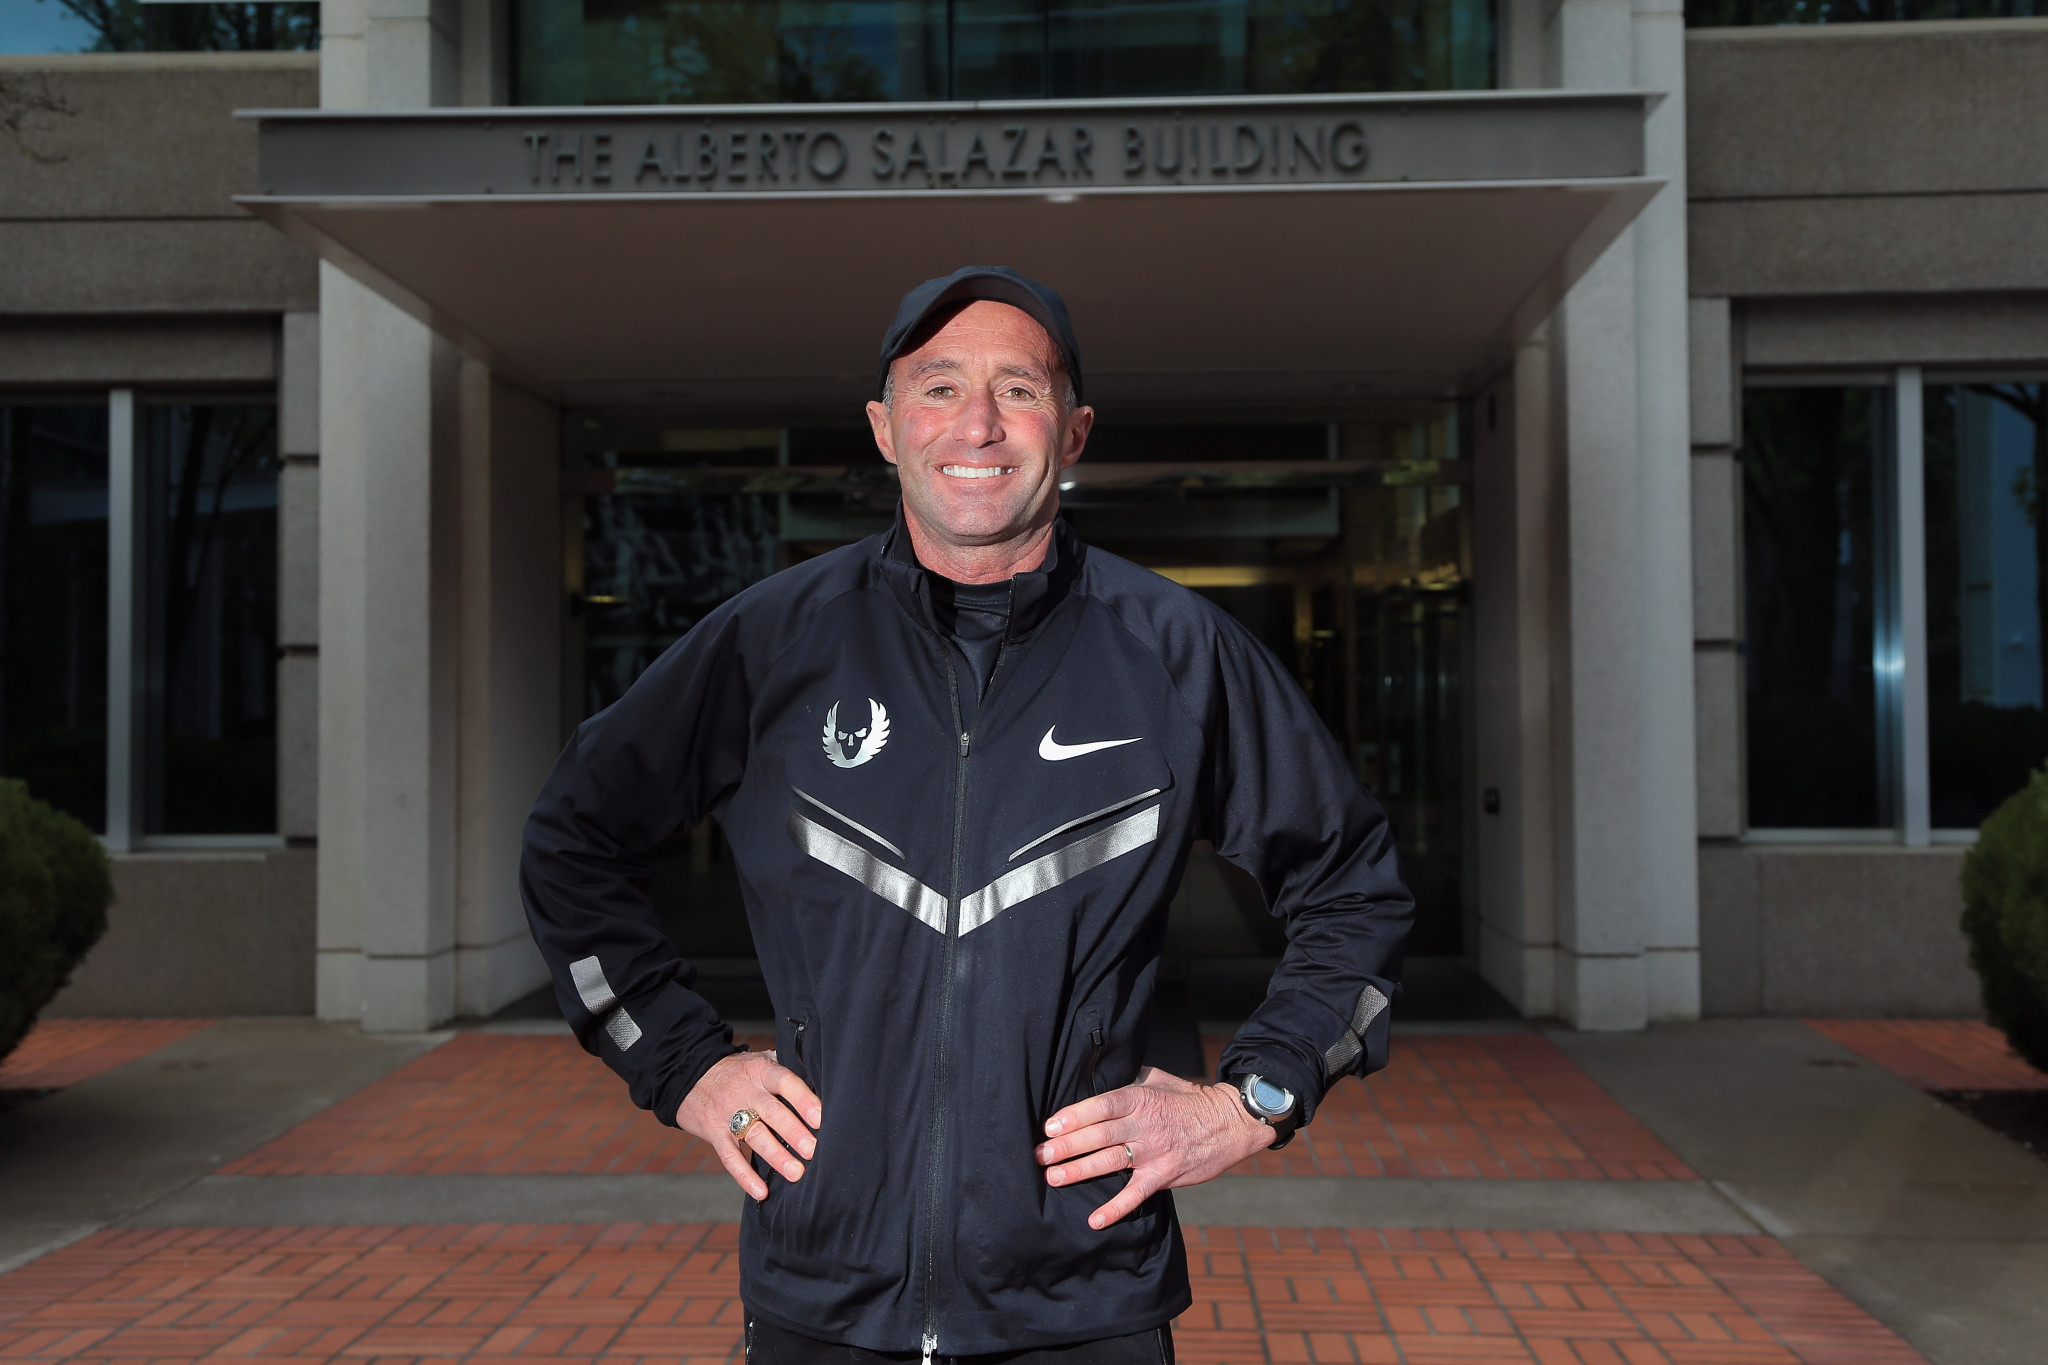 Alberto Salazar, who ran the ill-fated Nike Oregon Project dissolved in 2019, stands in front of a building on the Nike campus that has since been re-named ©Getty Images